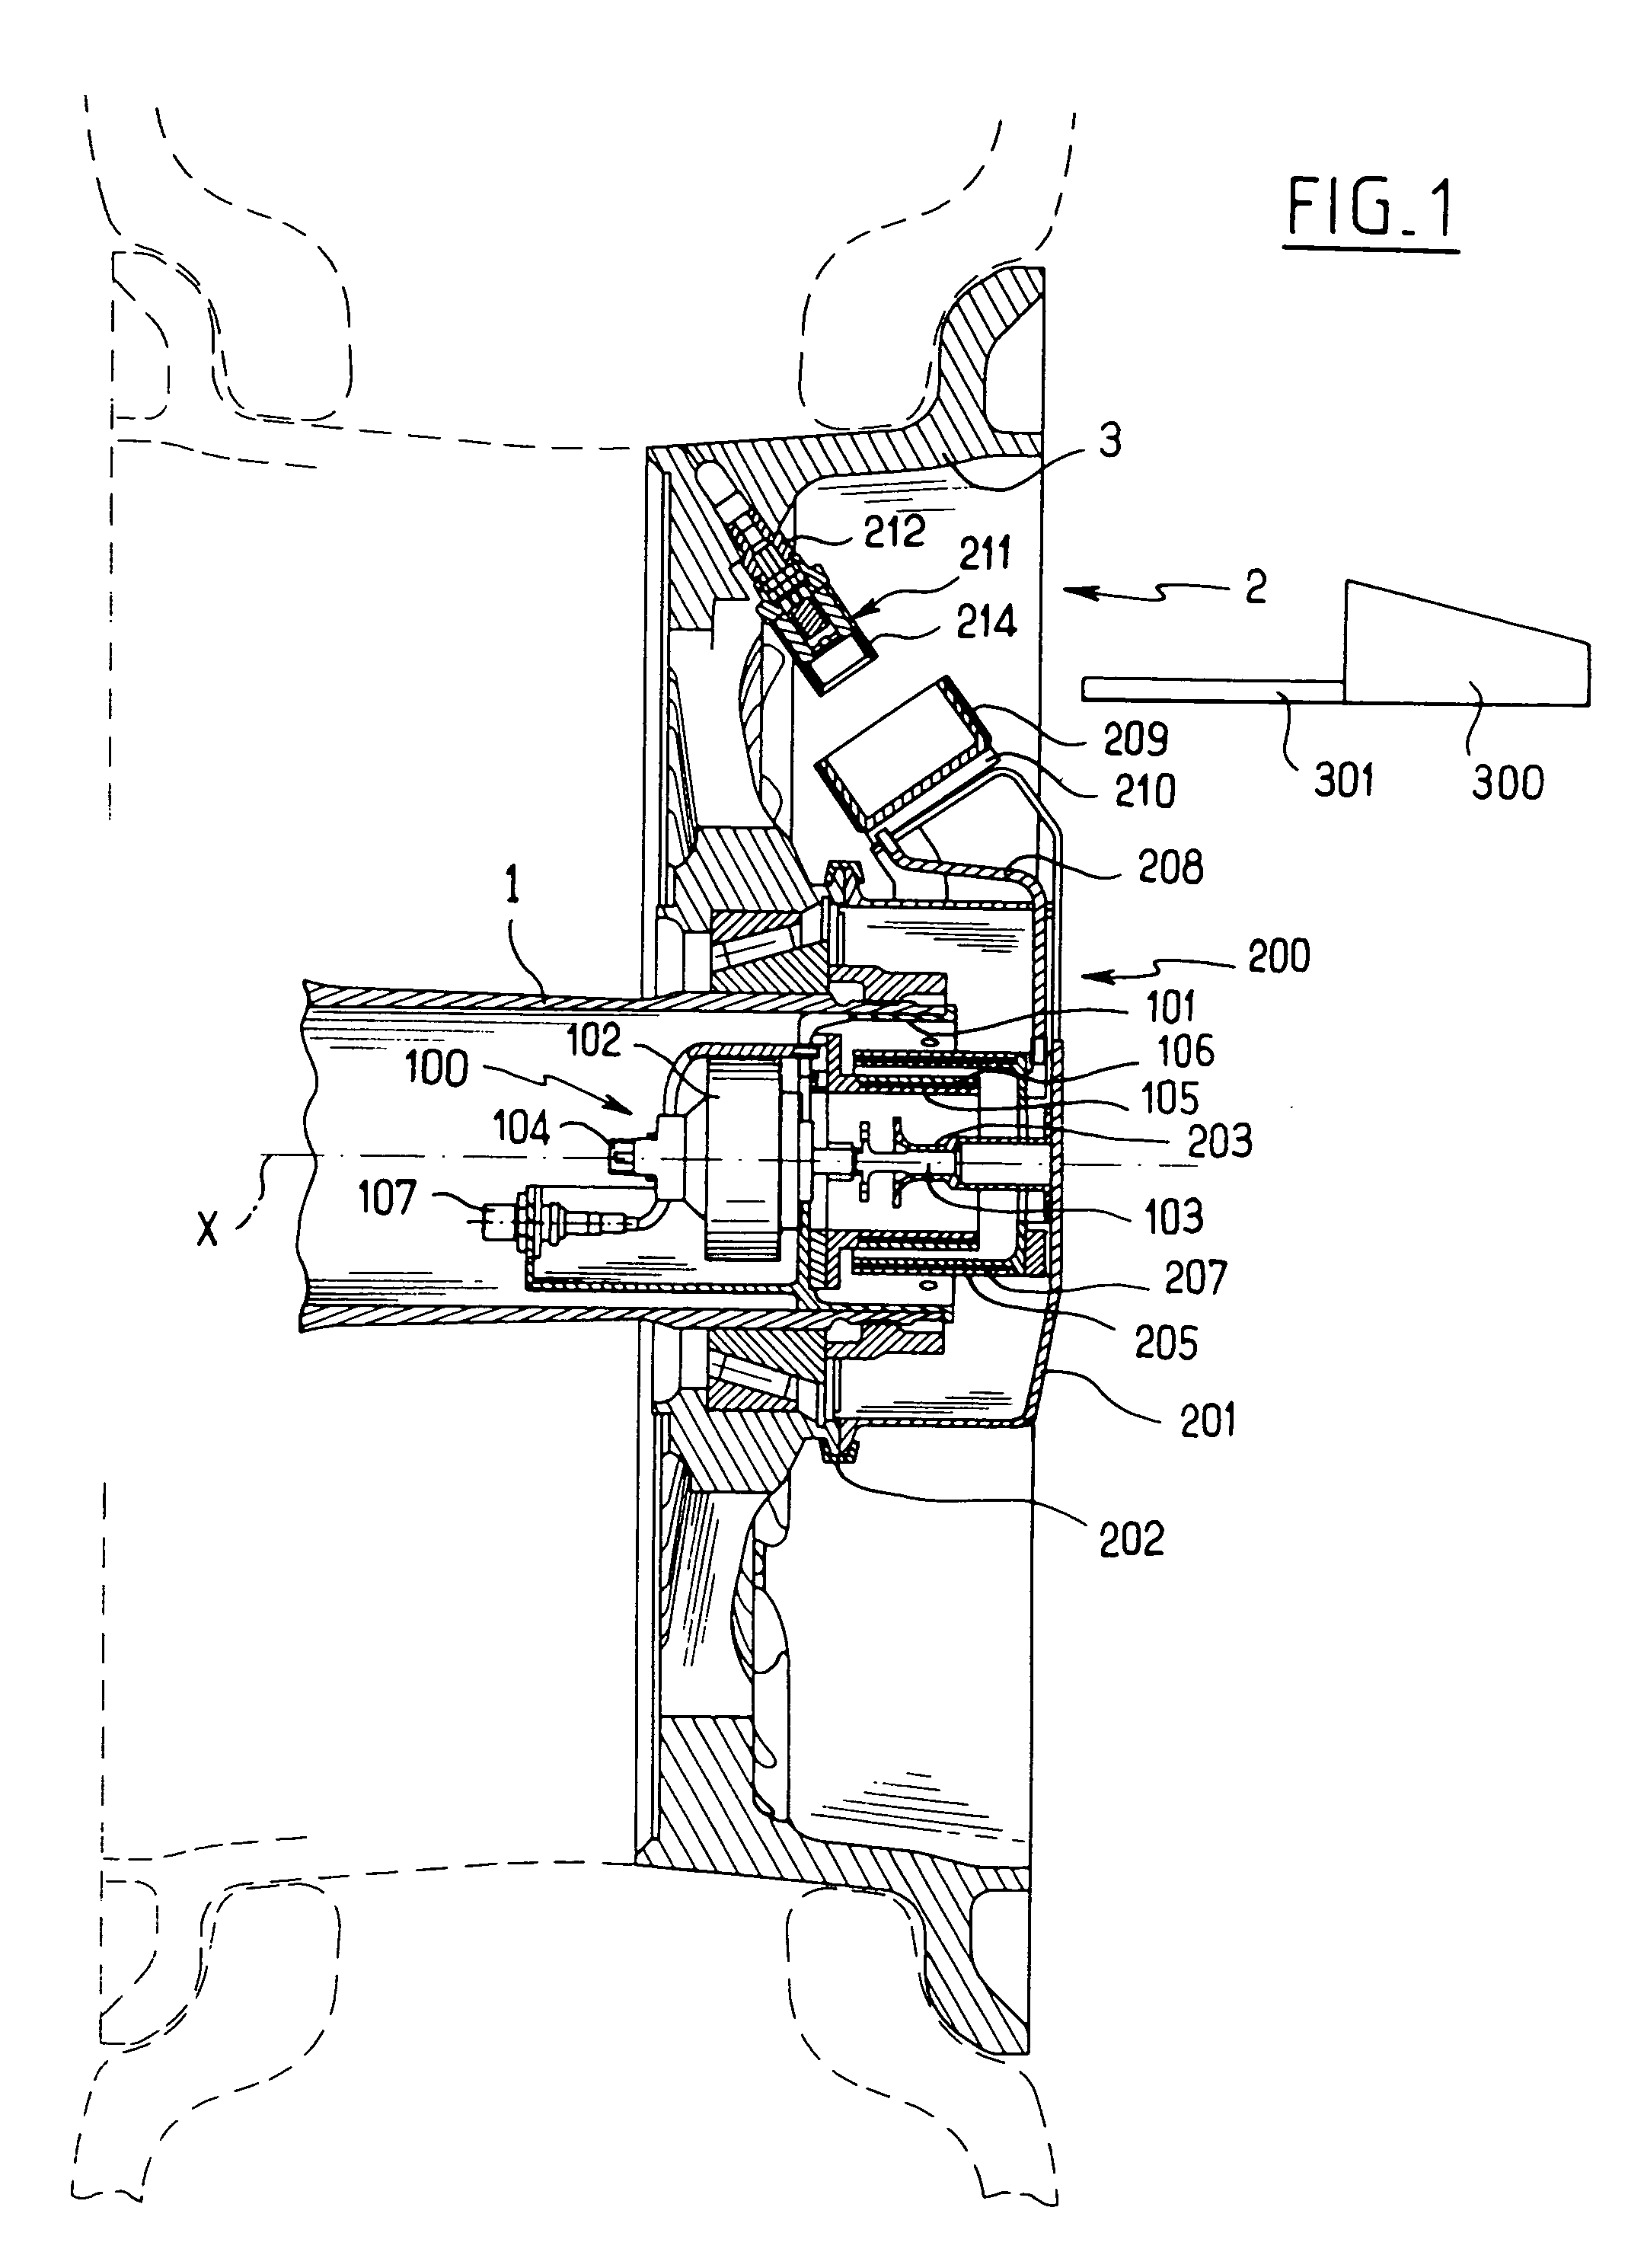 Axle end equipment for a vehicle, in particular an aircraft